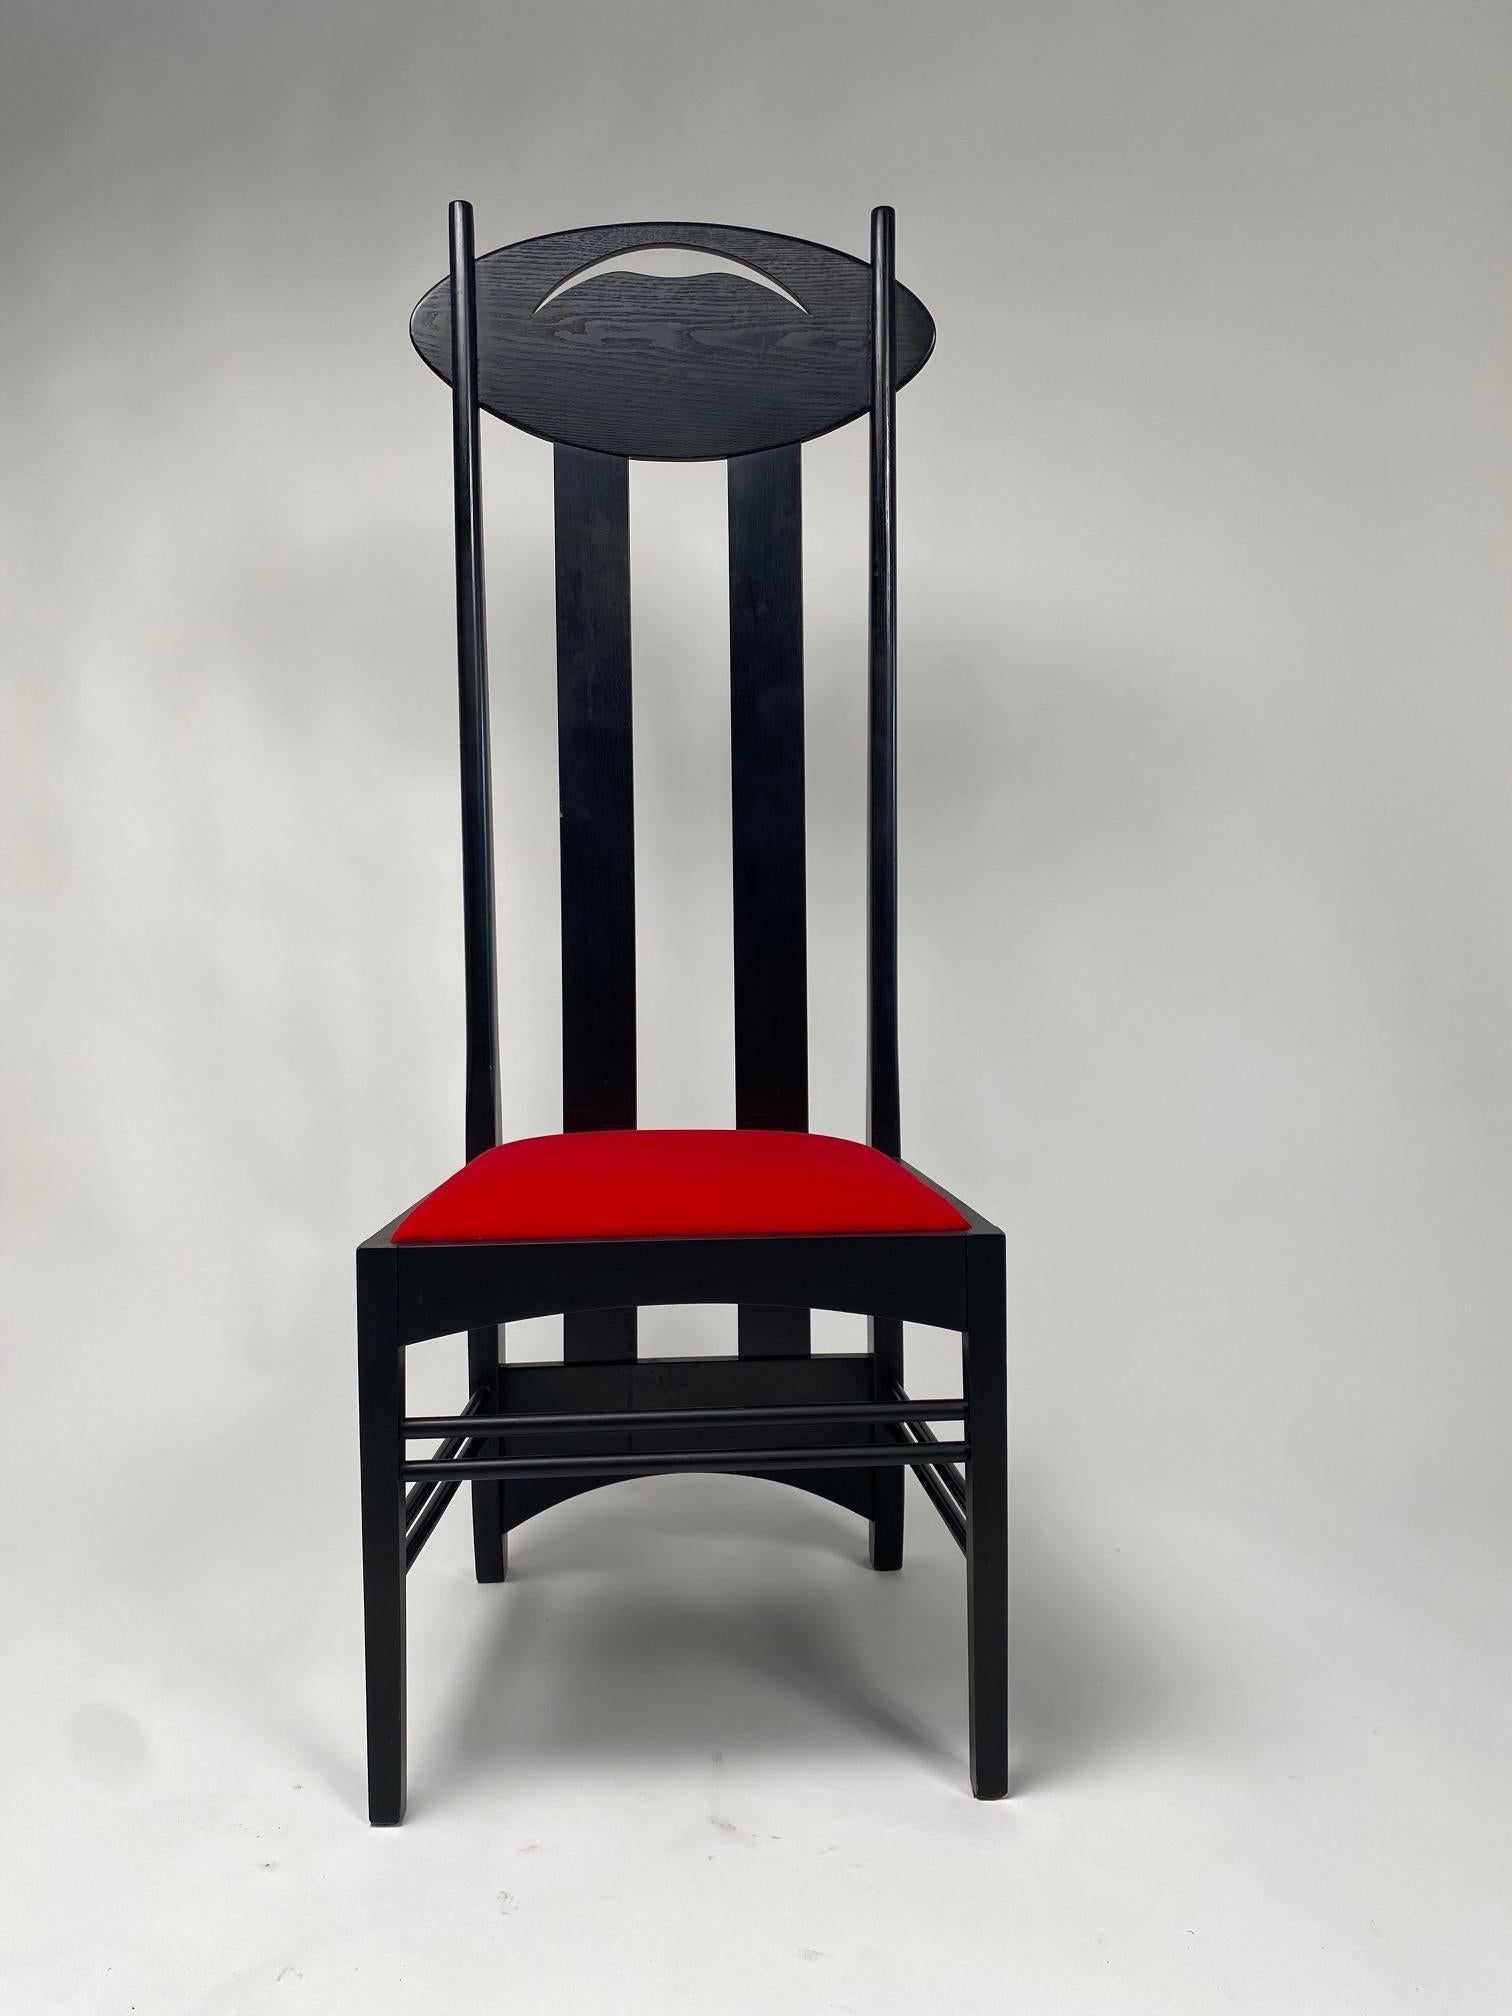 European Set of 2 Argyle Chairs by Charles R Mackintosh for Atelier International For Sale